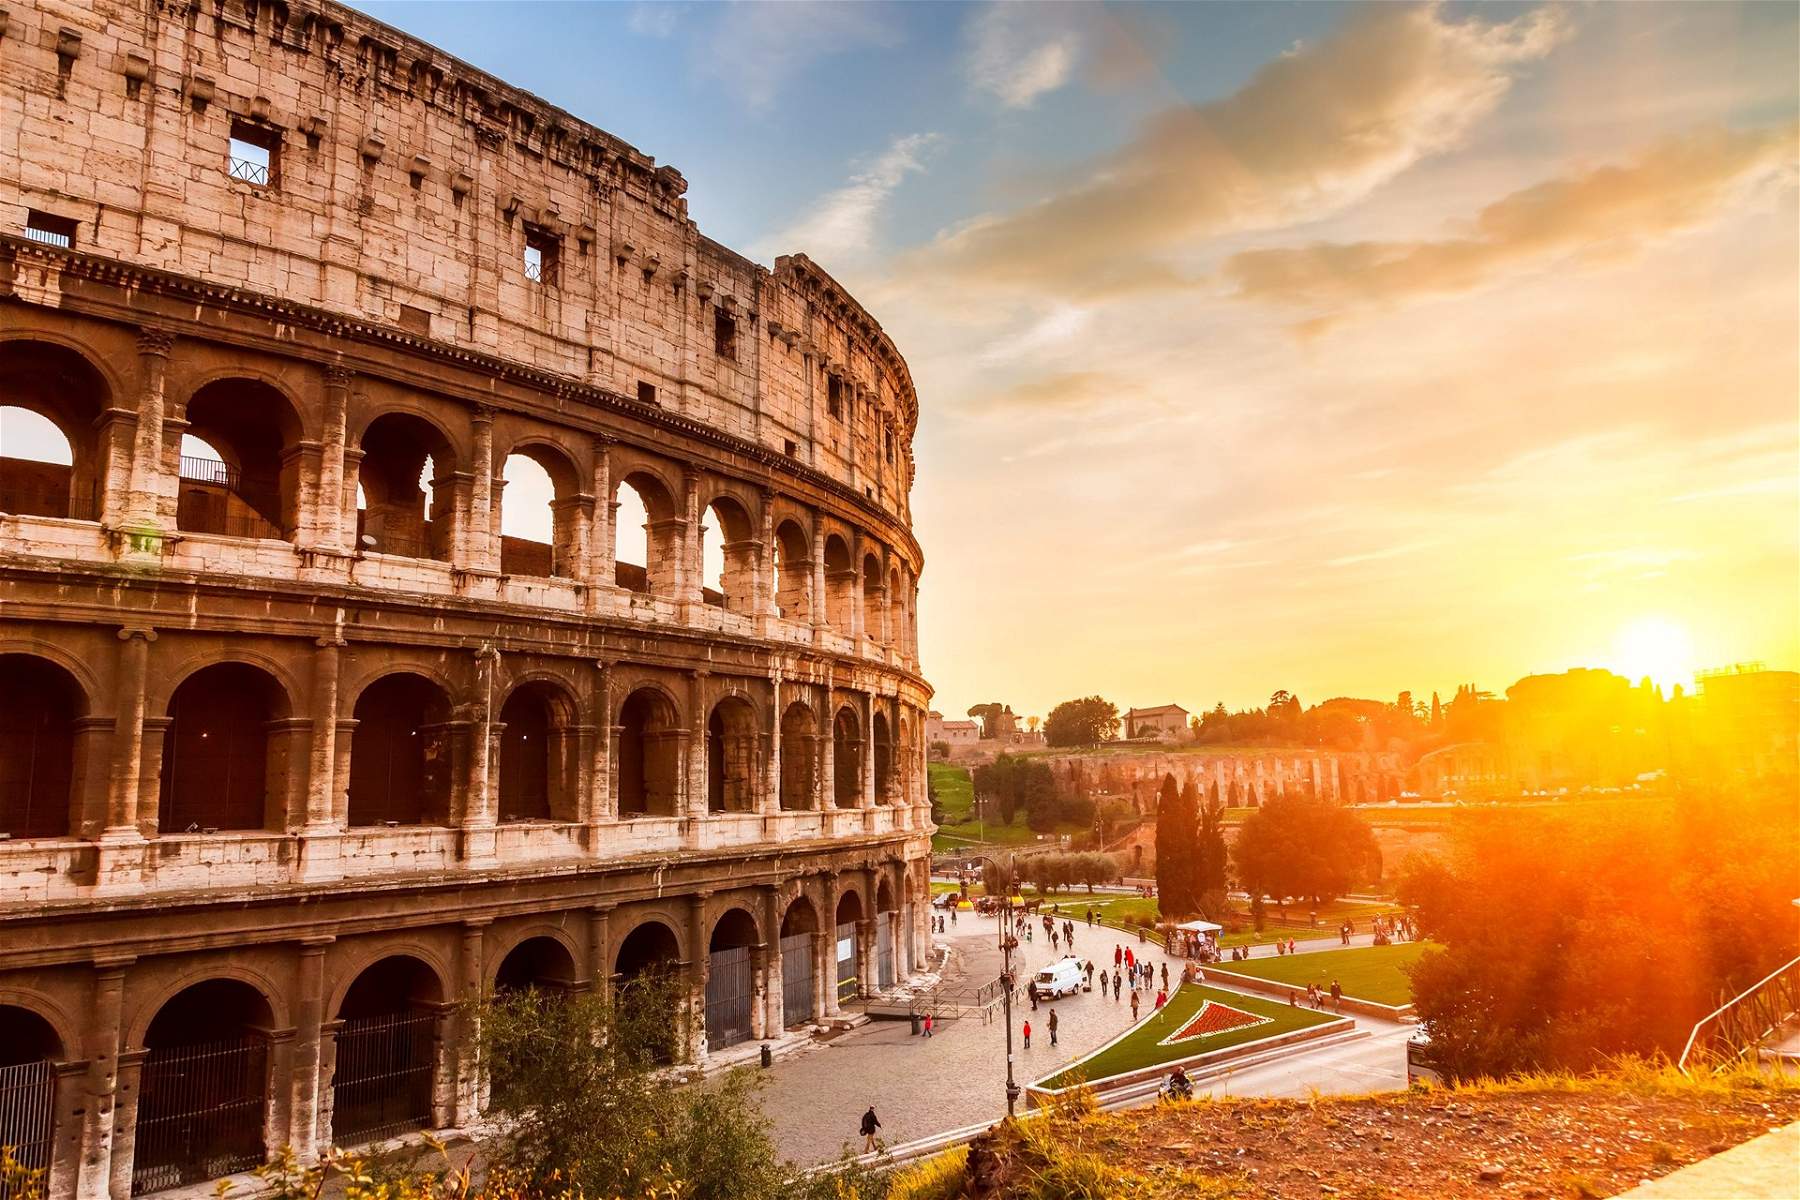 Colosseum Park, every Friday guided sunset tours in the footsteps of Goethe